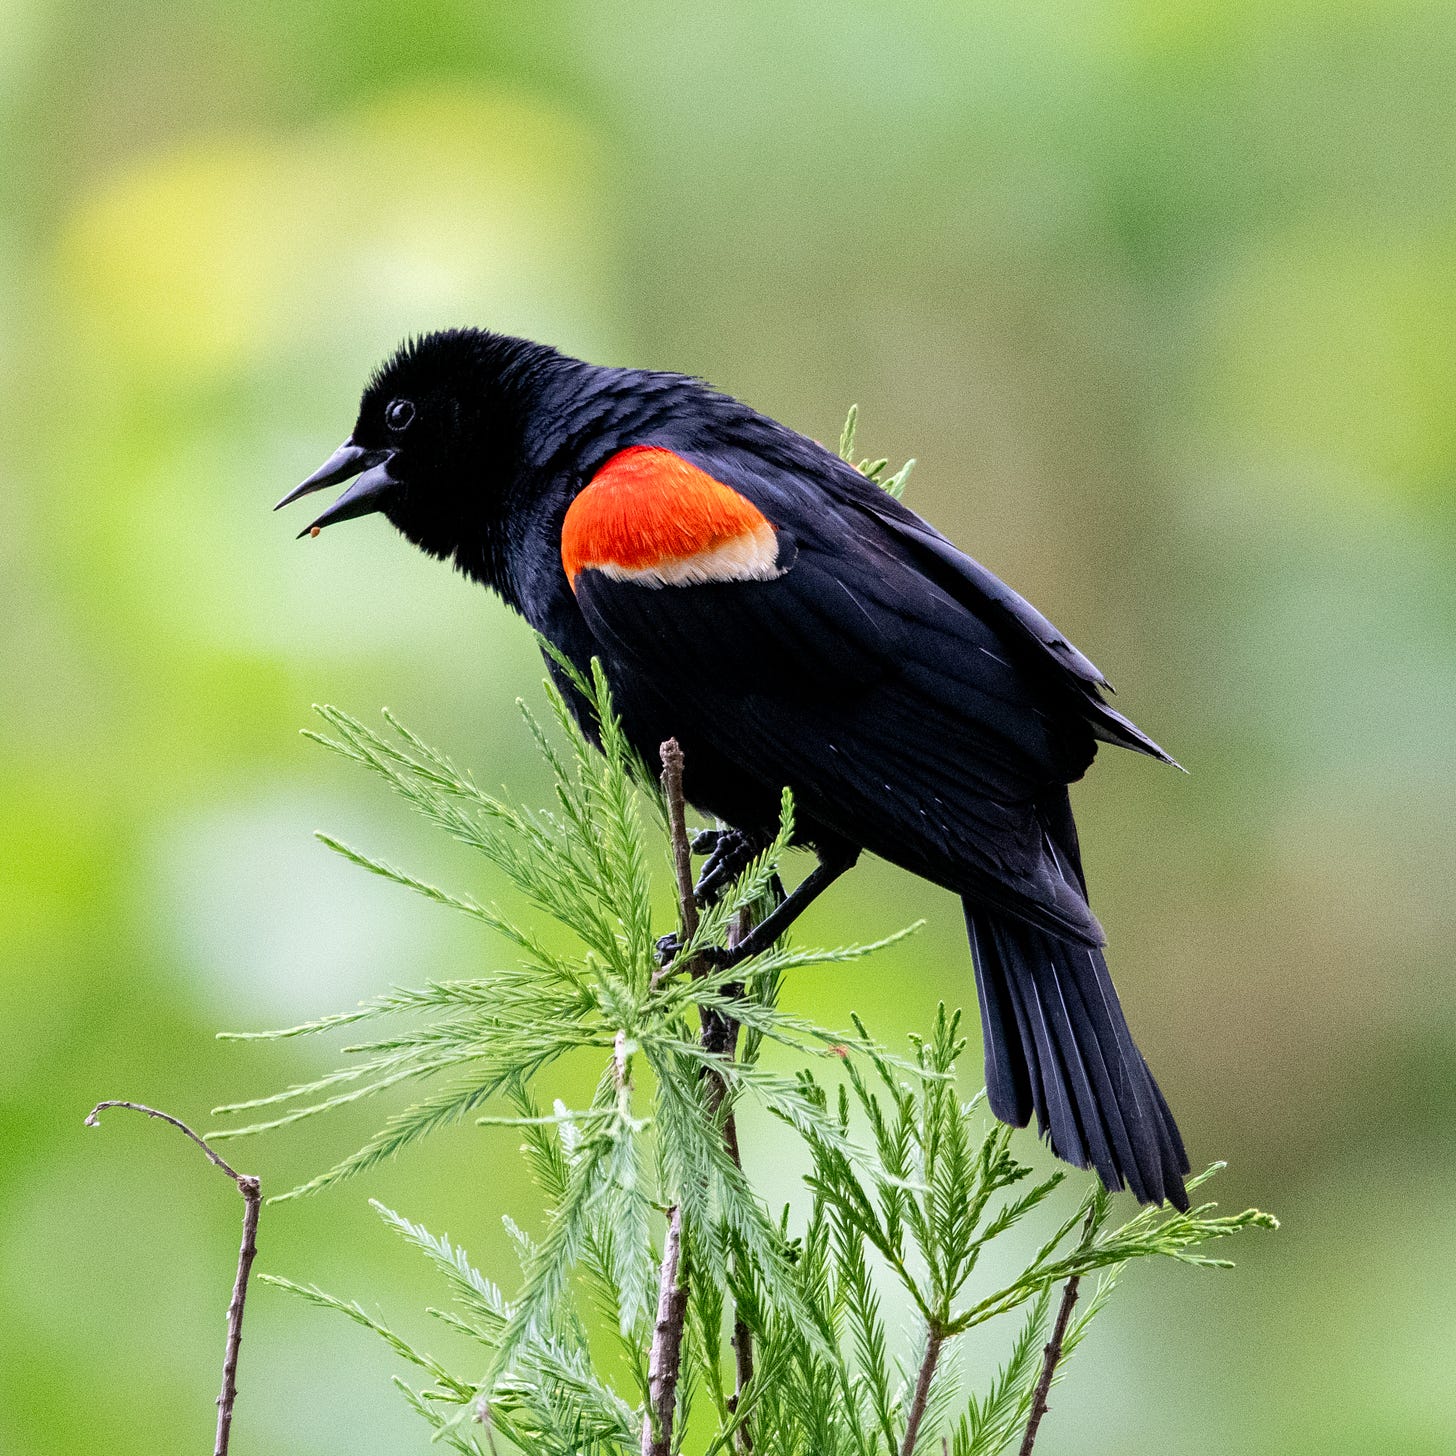 A red-winged blackbird flourishing his red epaulets and grawking its usual bullying grawk